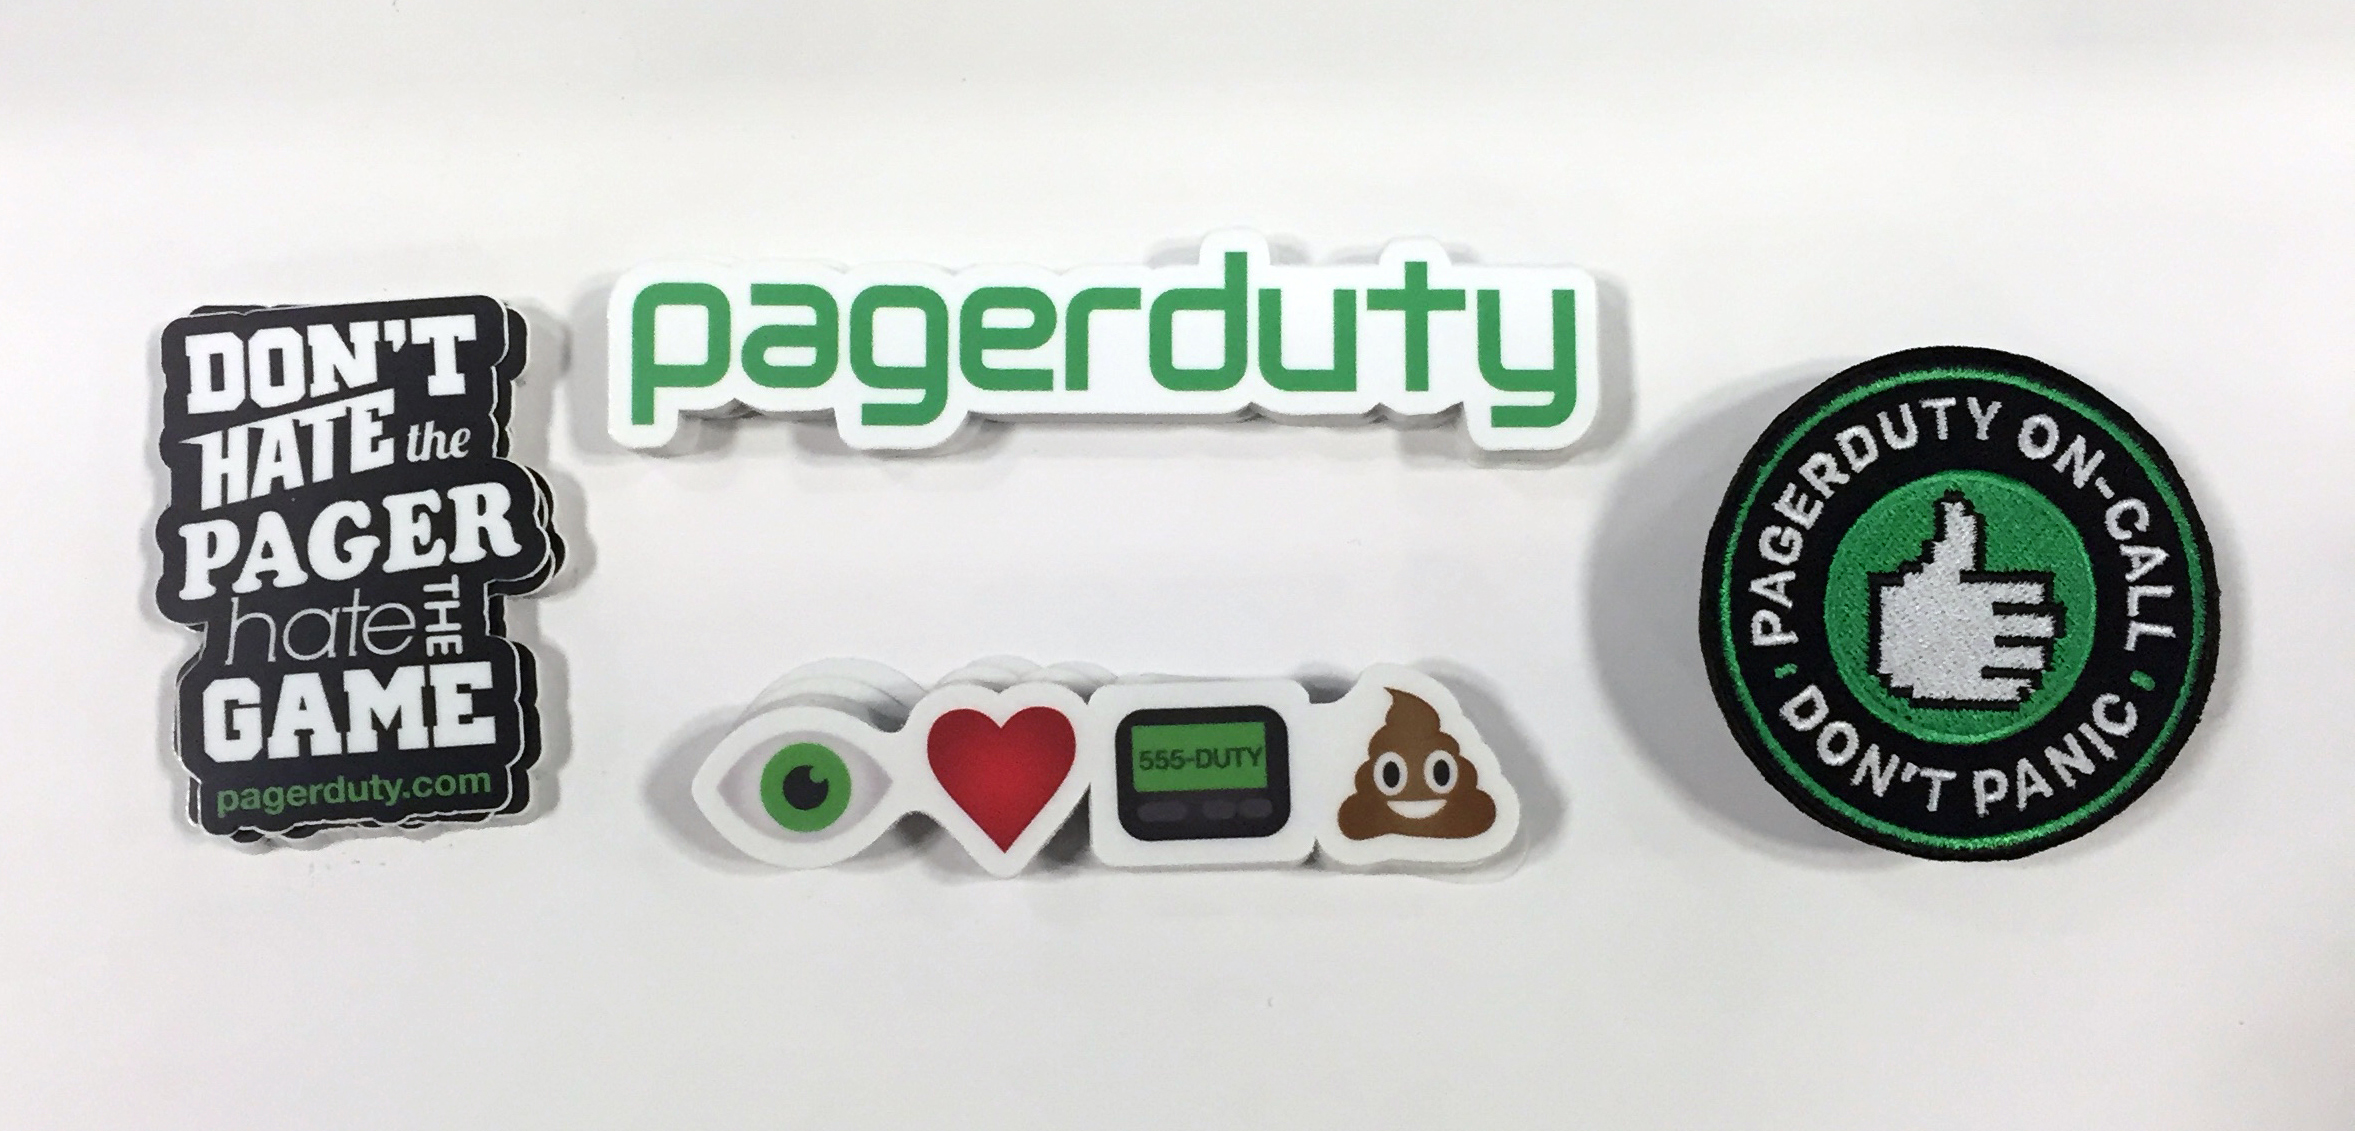 PagerDuty Event Booth